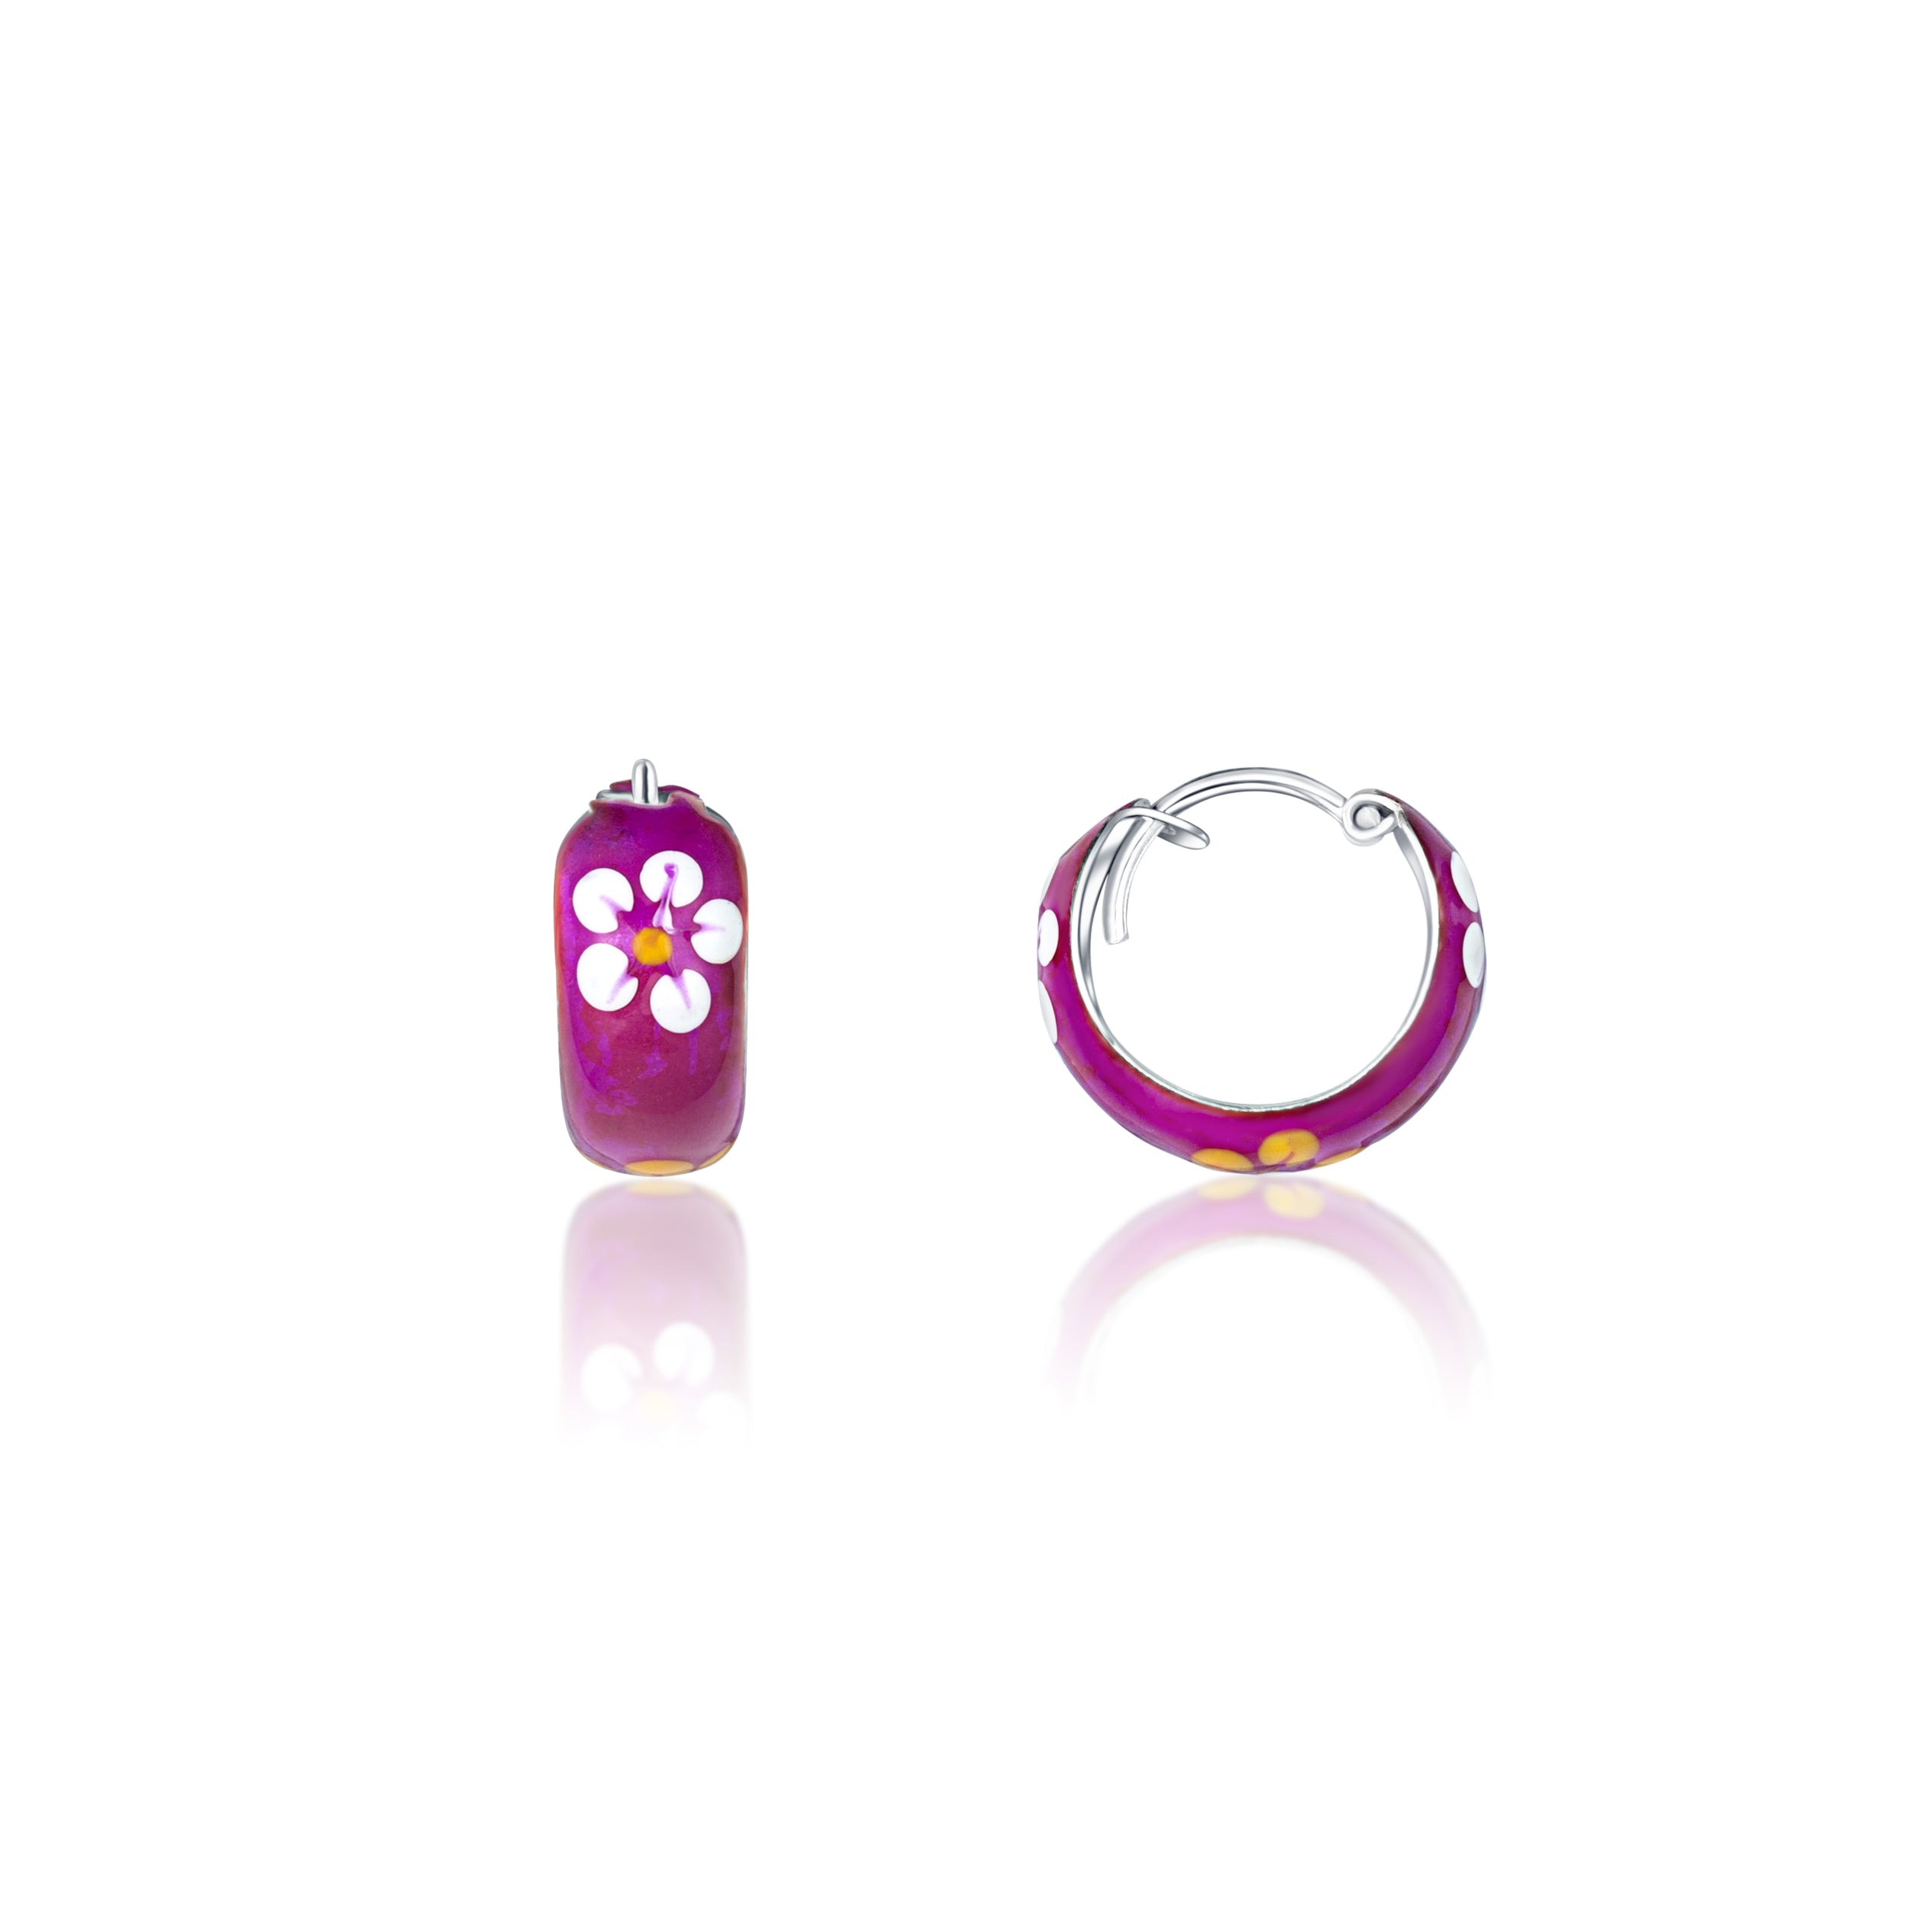 92.5 sterling silver hoops/baali with purple enamel and yellow printed flowers finished in silver and hinged back closure 